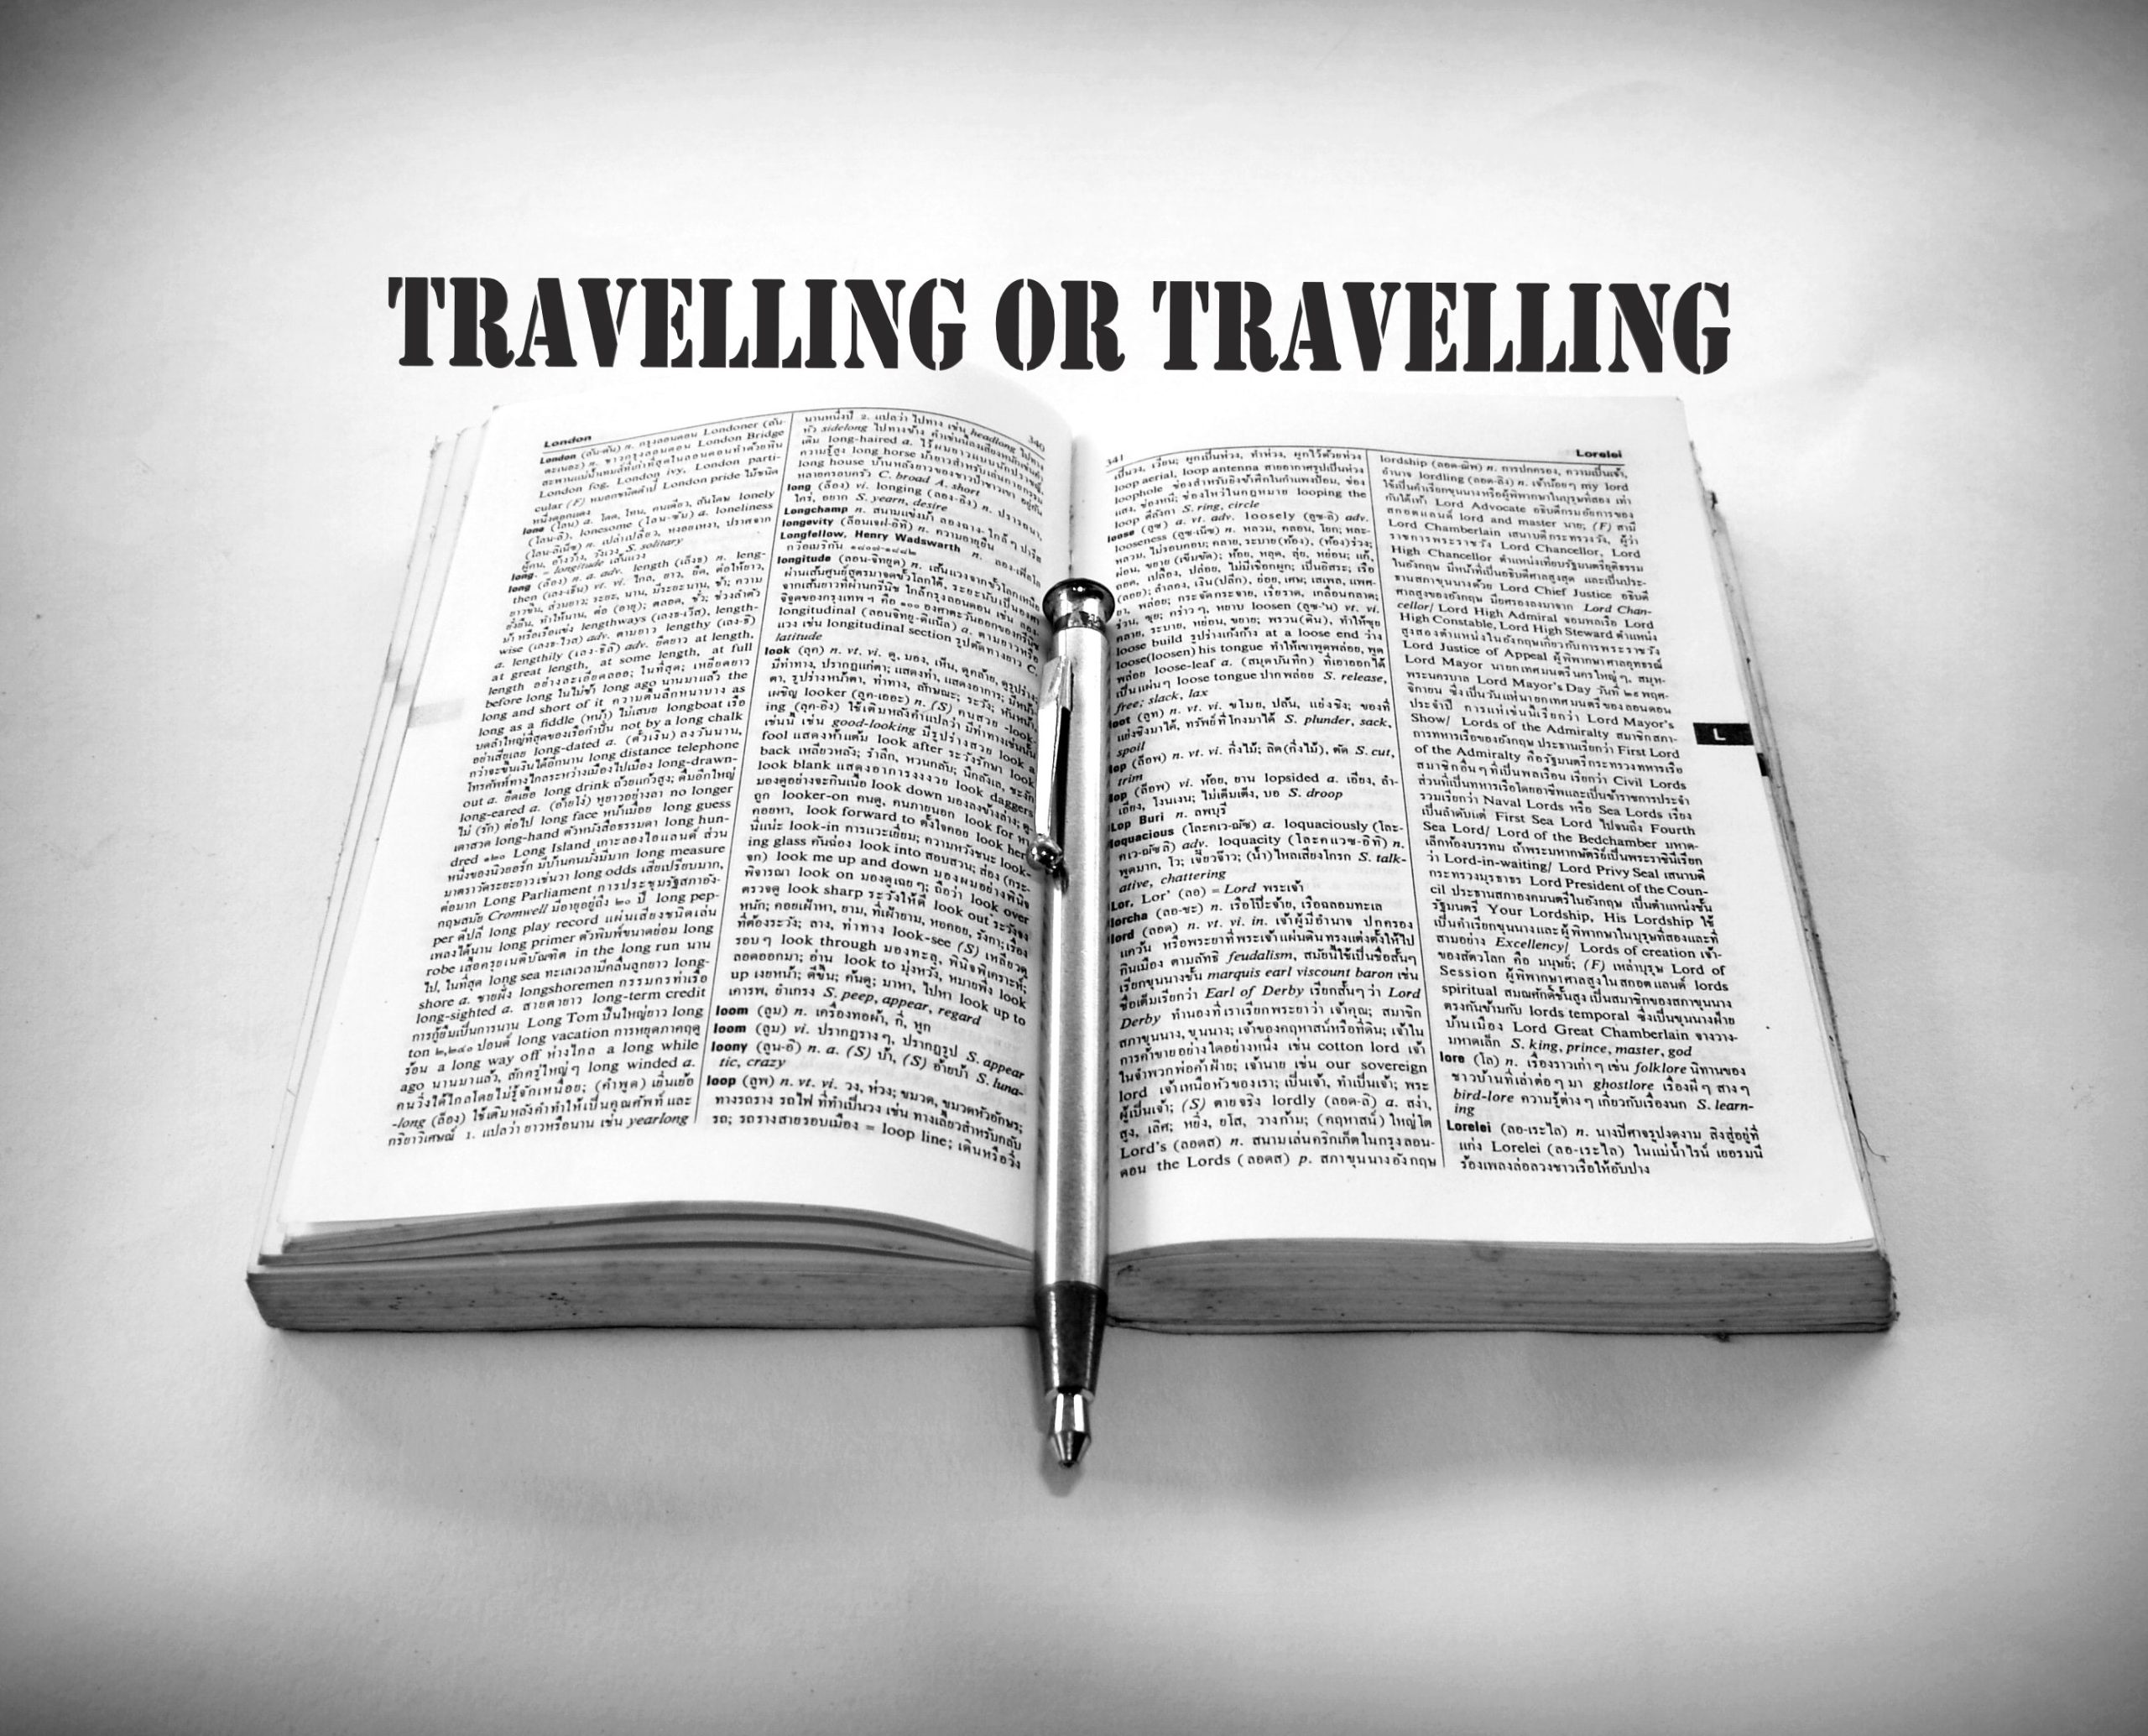 travel or traveling which is correct